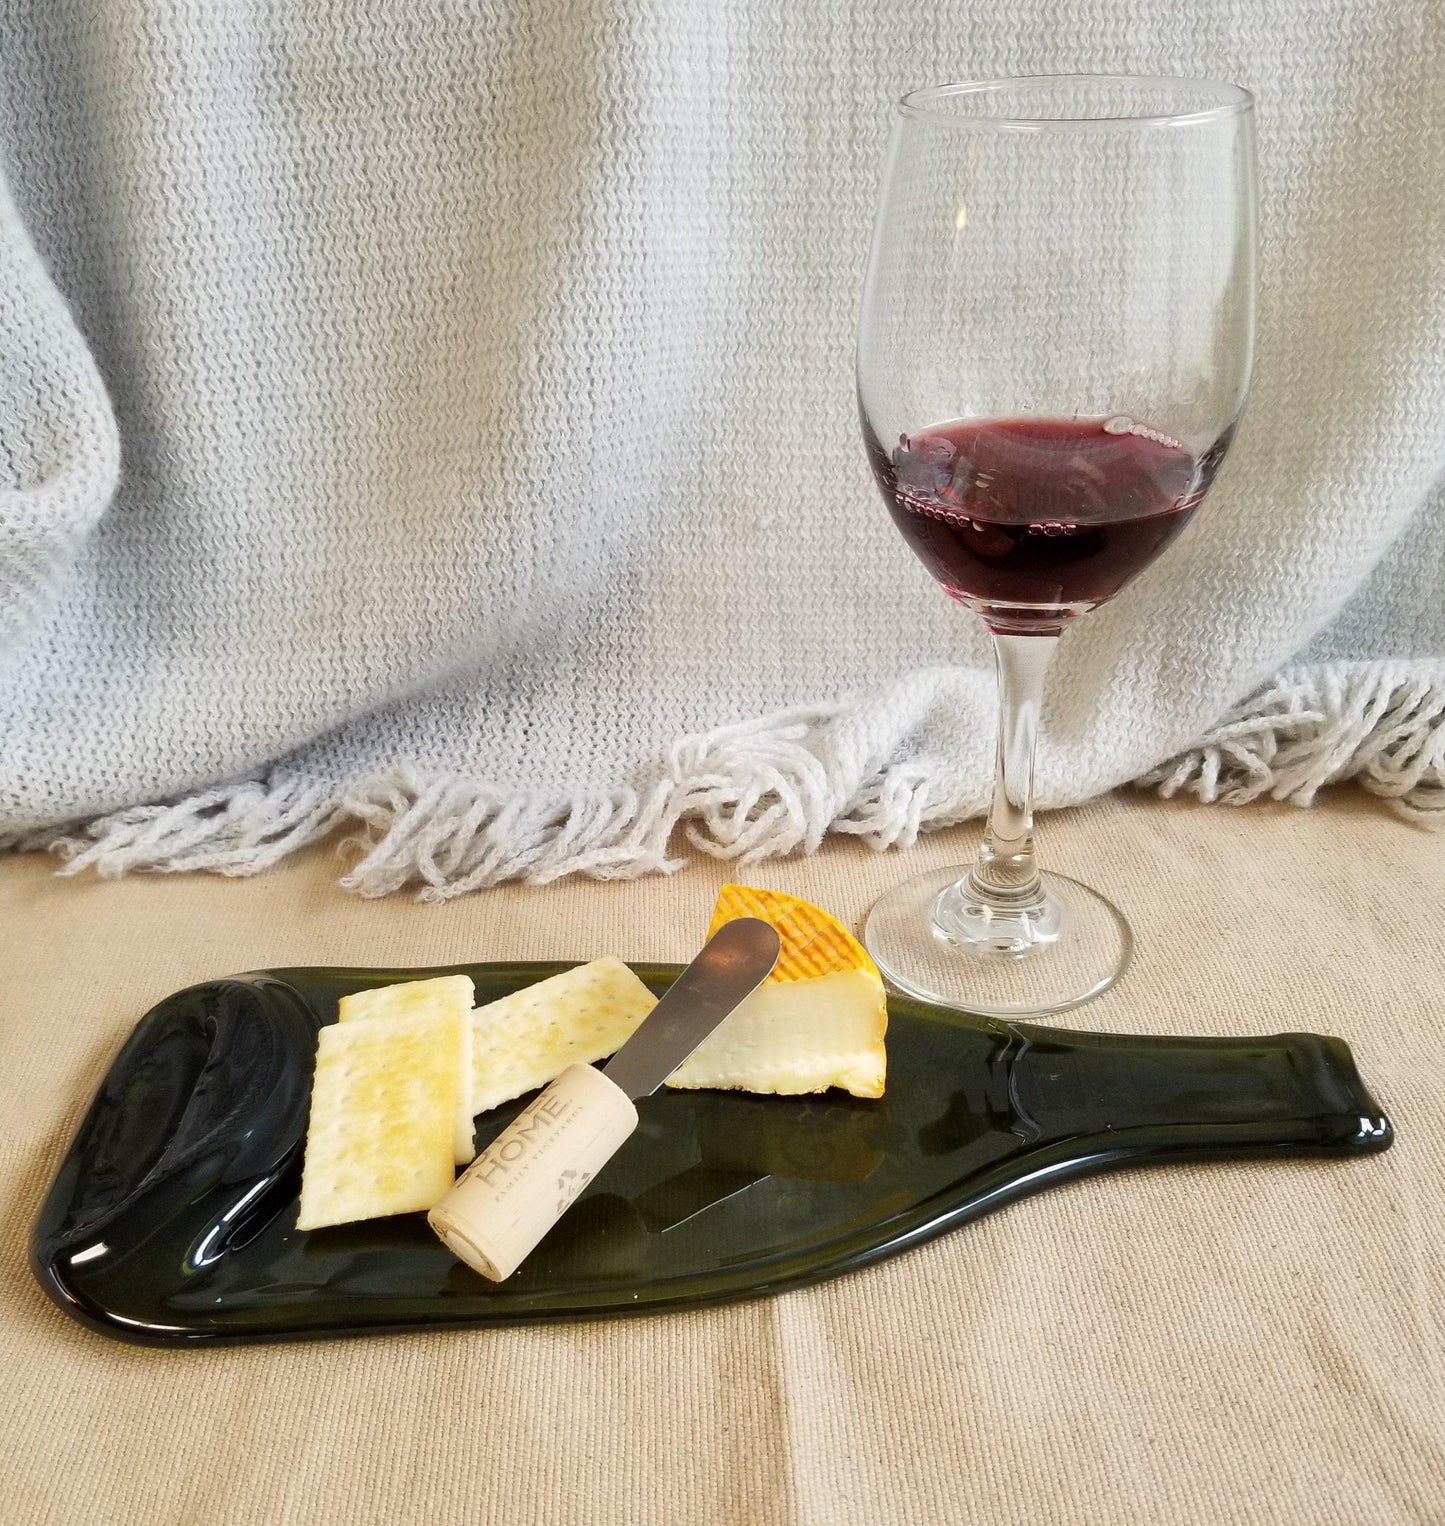 Recycled melted wine bottle cheese plate board with etched Wine and Grape pattern from seeds glassworks